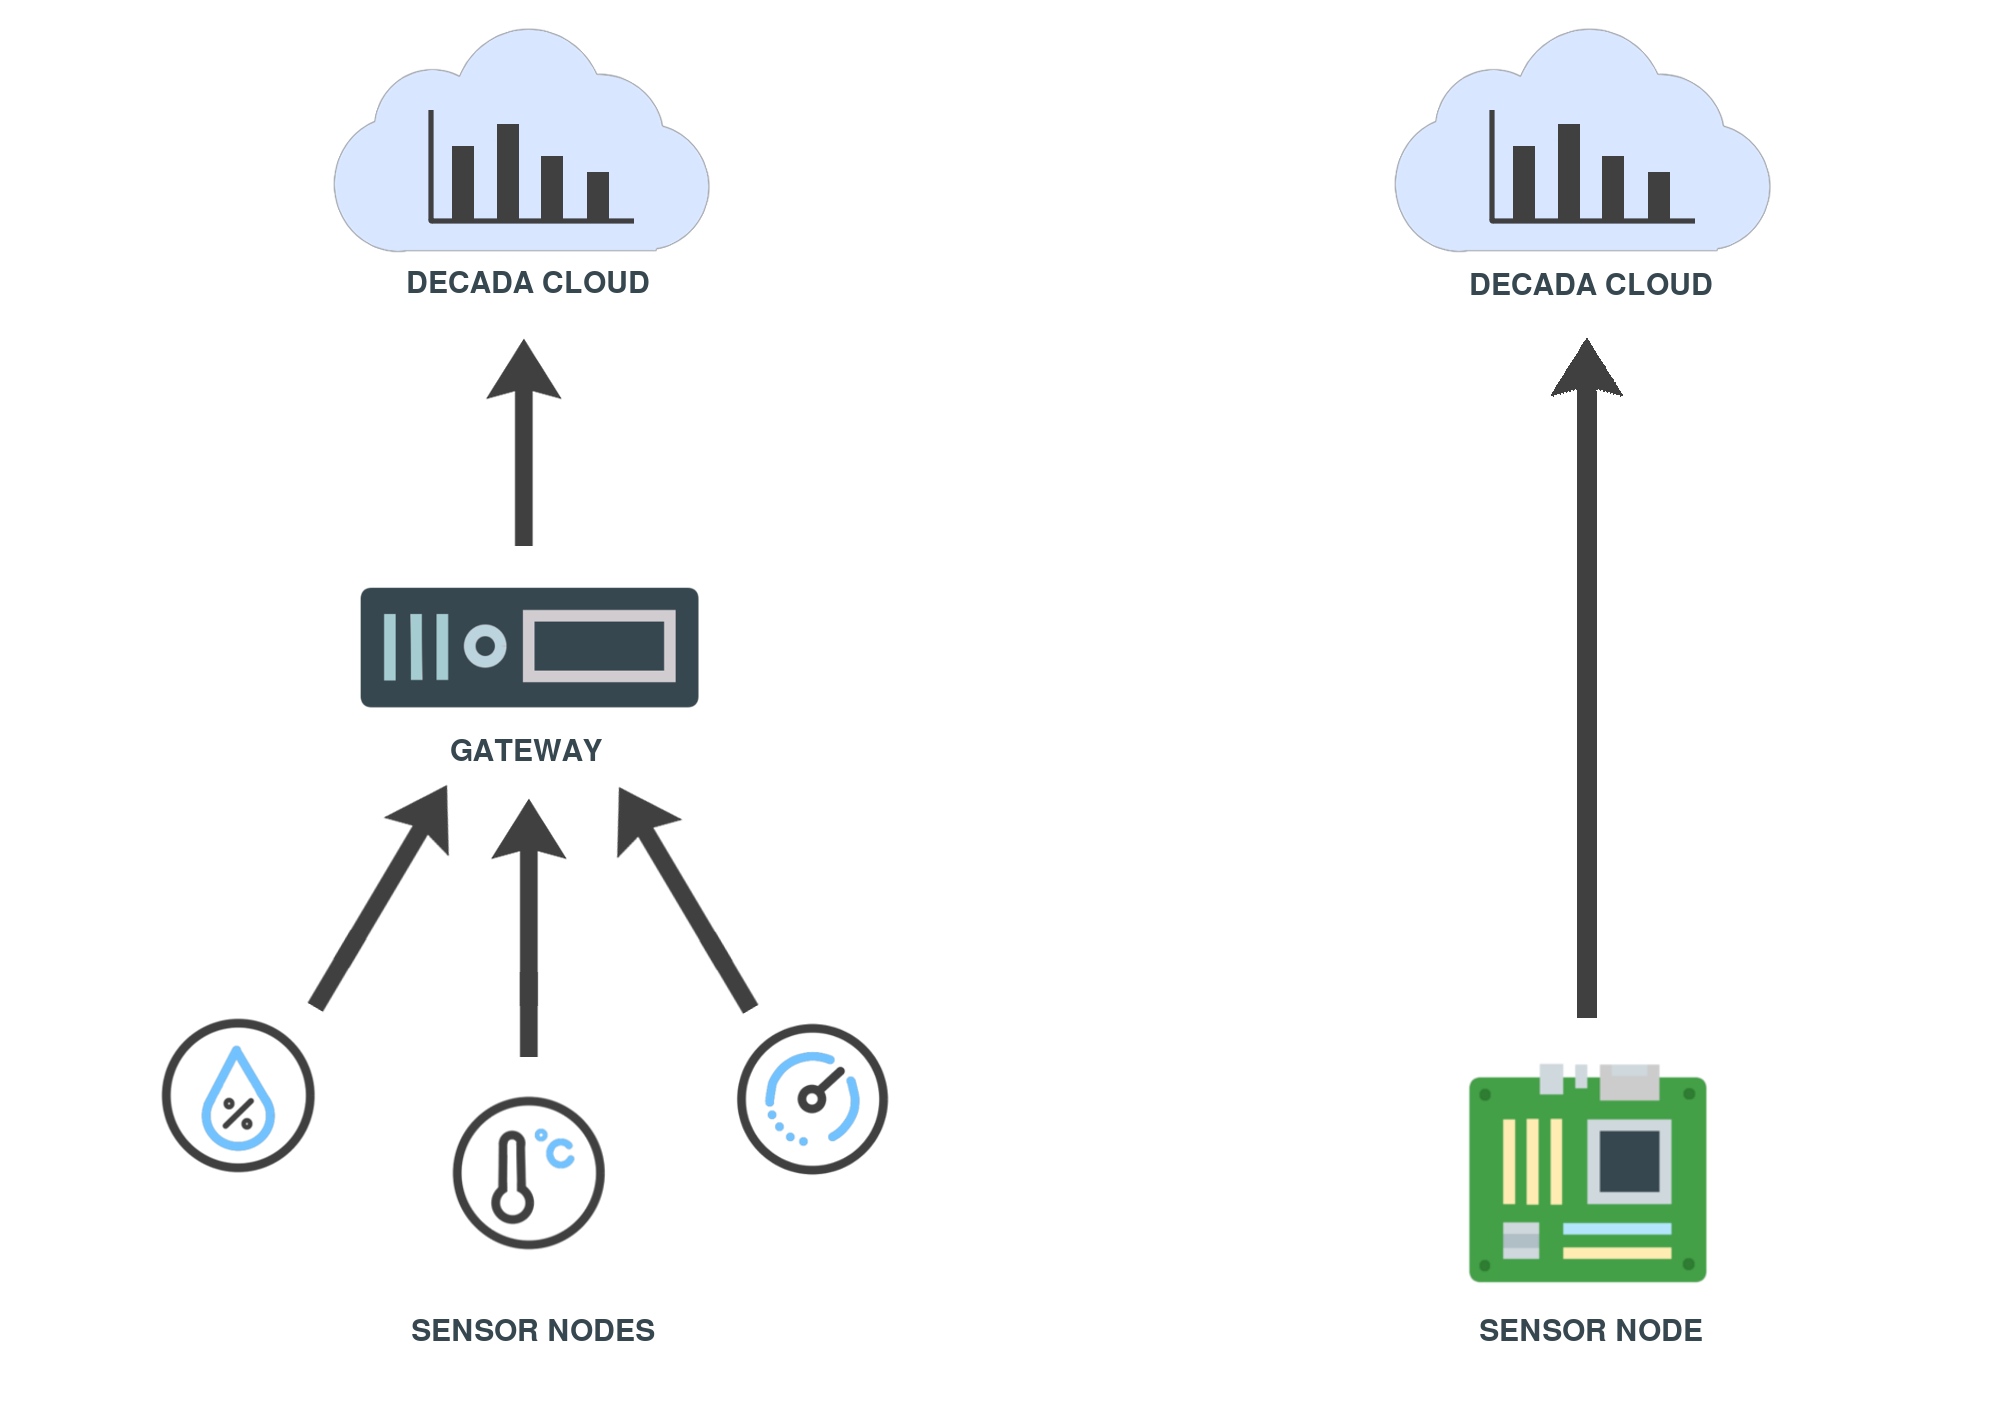 Fig 1: Two ways to connect sensors to DECADA Cloud. Through a gateway, or with a direct connection to cloud.